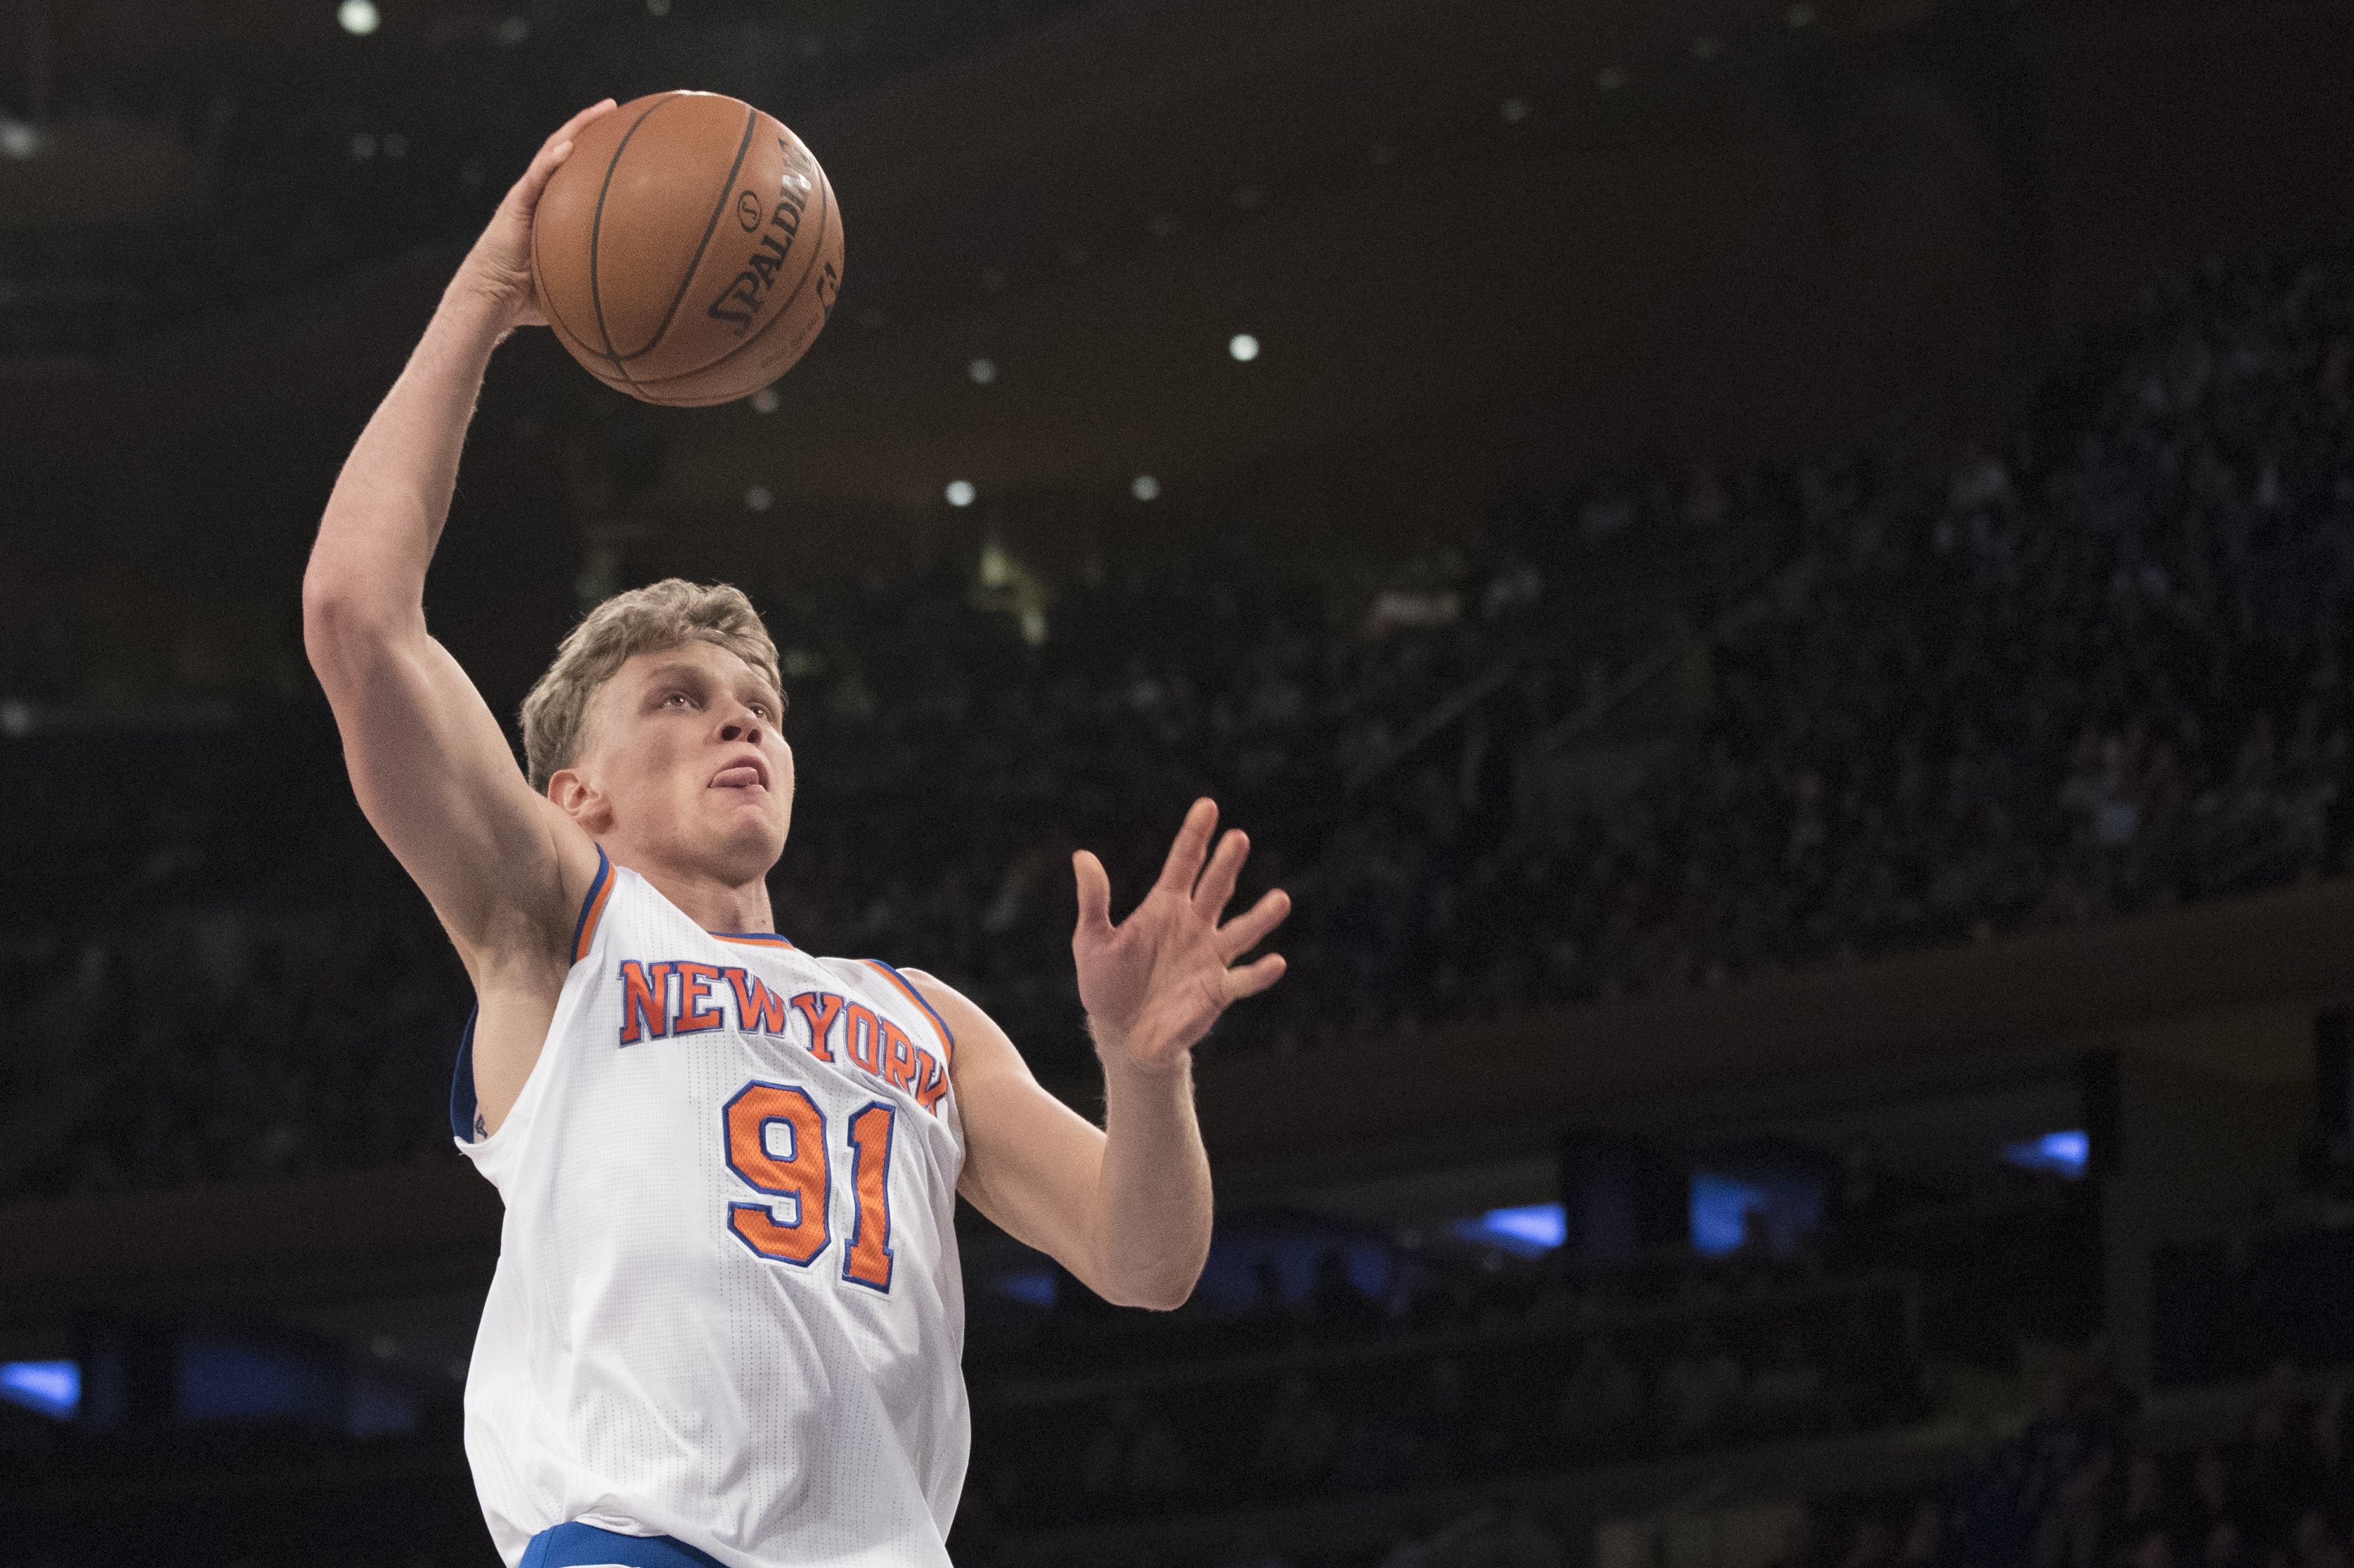 New York Knicks forward Mindaugas Kuzminskas goes to the basket during the second half of an NBA basketball game, Monday against the Dallas Mavericks, Nov. 14, 2016, at Madison Square Garden in New York. The Knicks won 93-77. (AP Photo/Mary Altaffer)